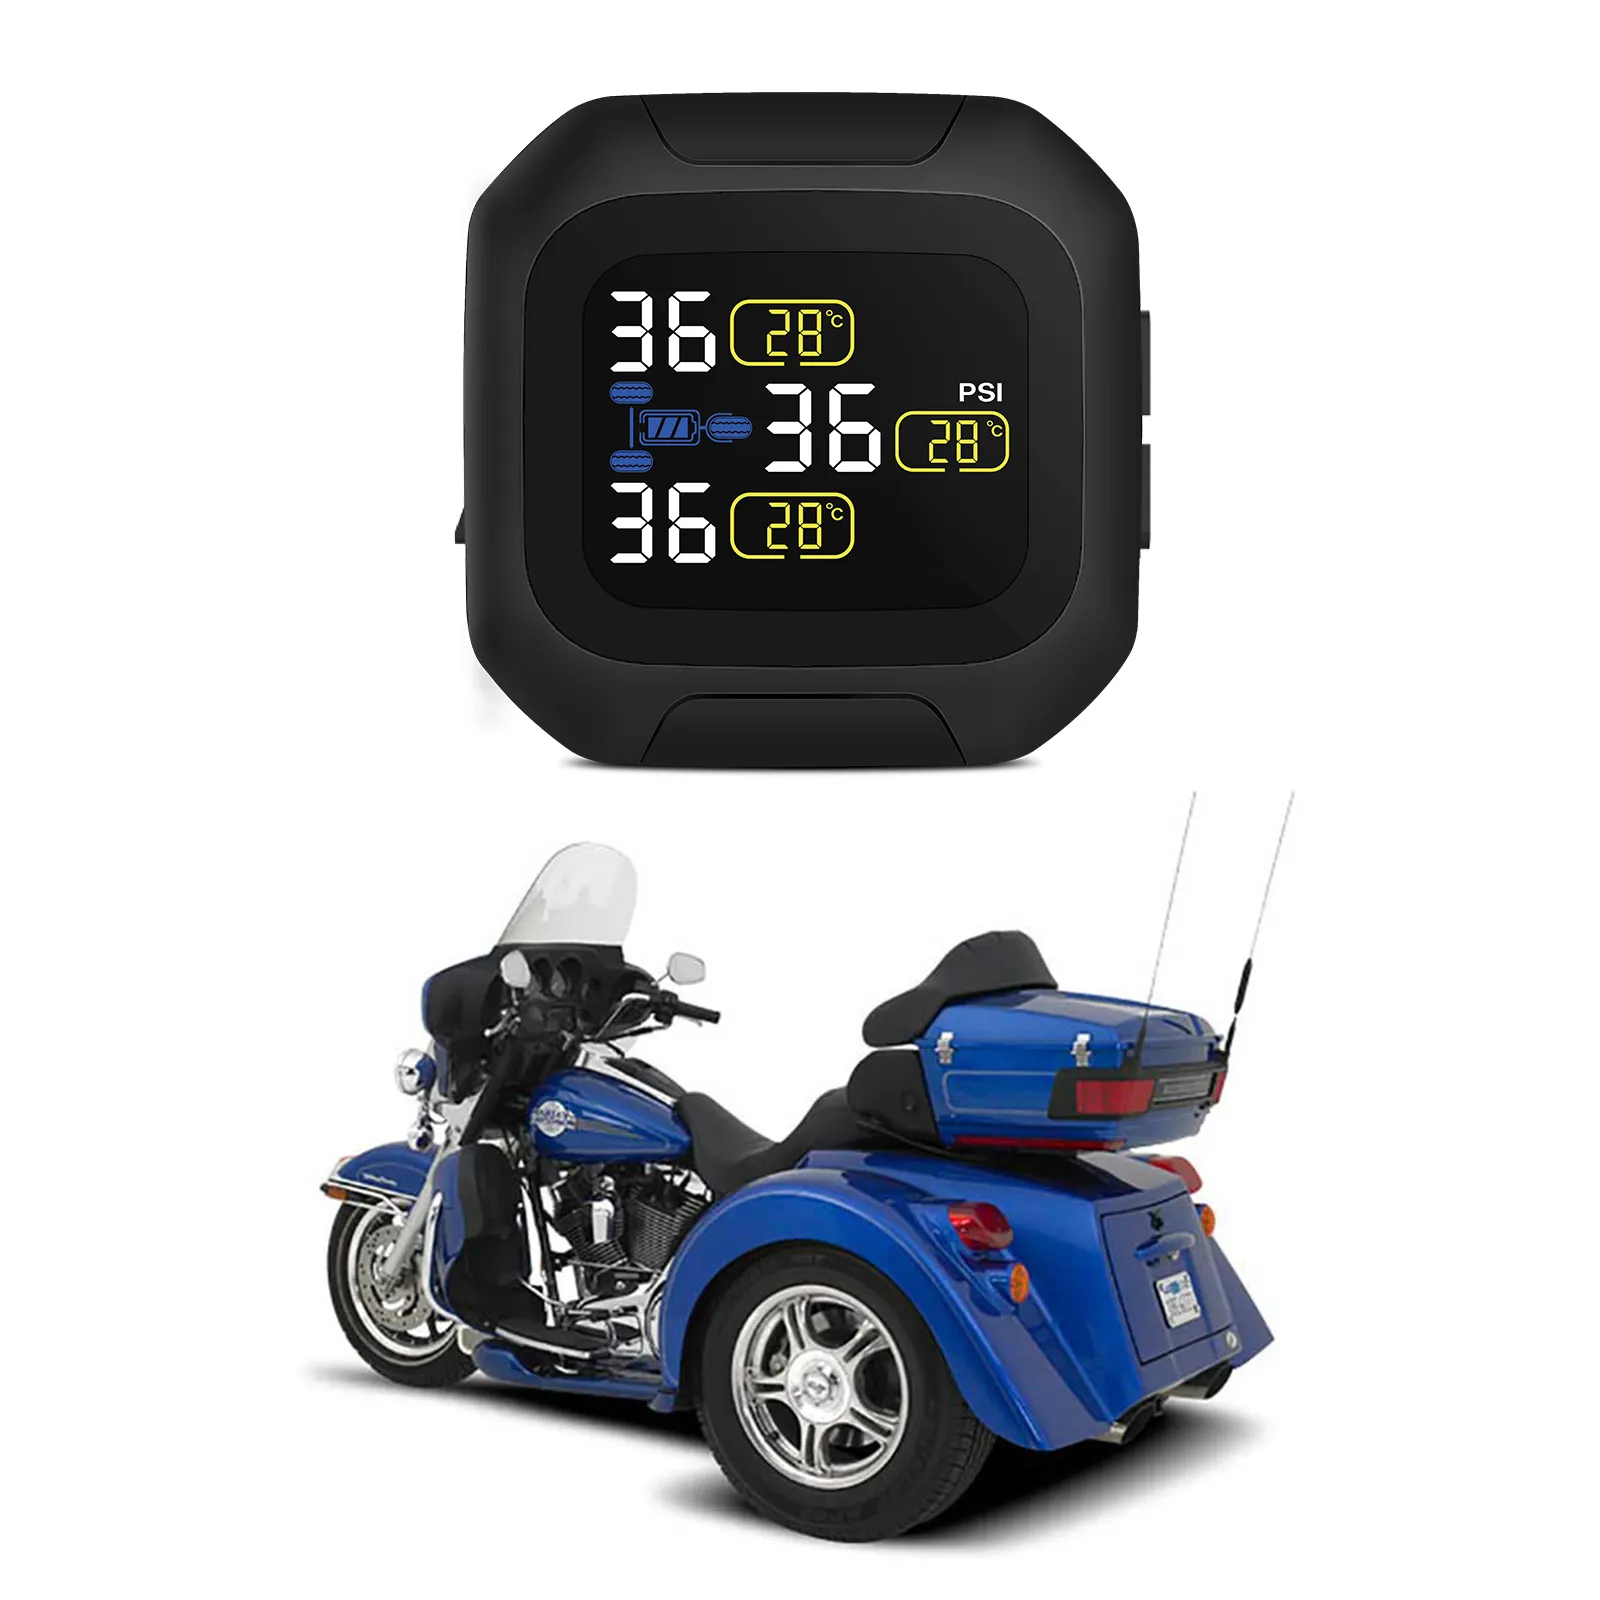 Three Wheeled Motorcycle Tire Pressure Monitoring Intelligent System TPMS and Three External Sensors